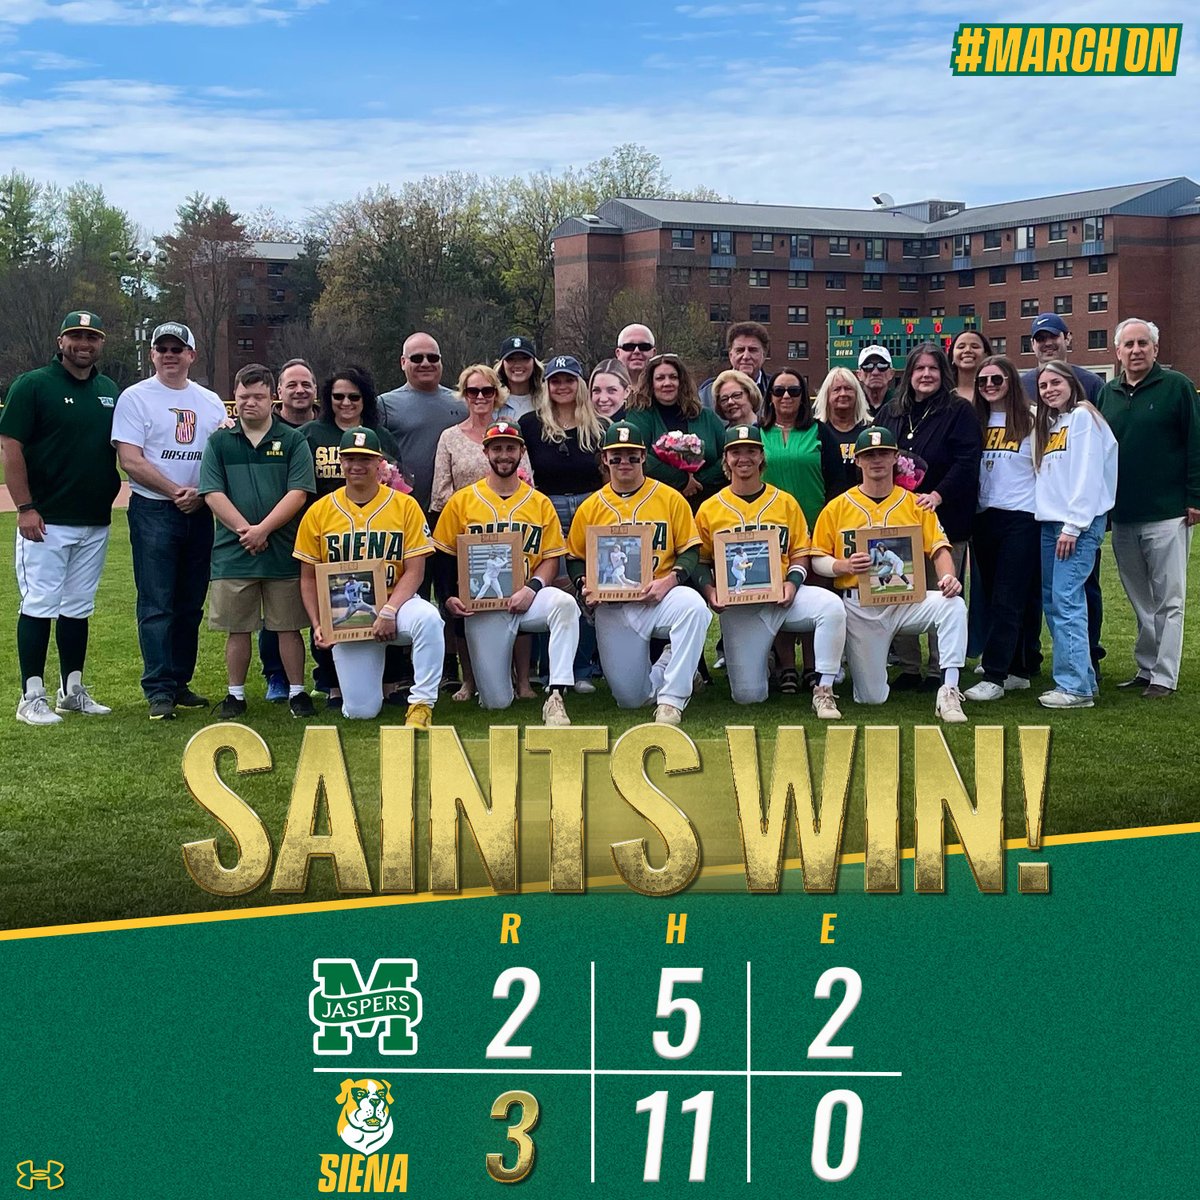 ⚾️ RECAP | @SienaBaseball celebrated Senior Day with a walkoff victory at Connors Park on Saturday

📰 t.ly/SMWZN

#MarchOn x #SienaSaints x #NCAABaseball x #MAACBaseball